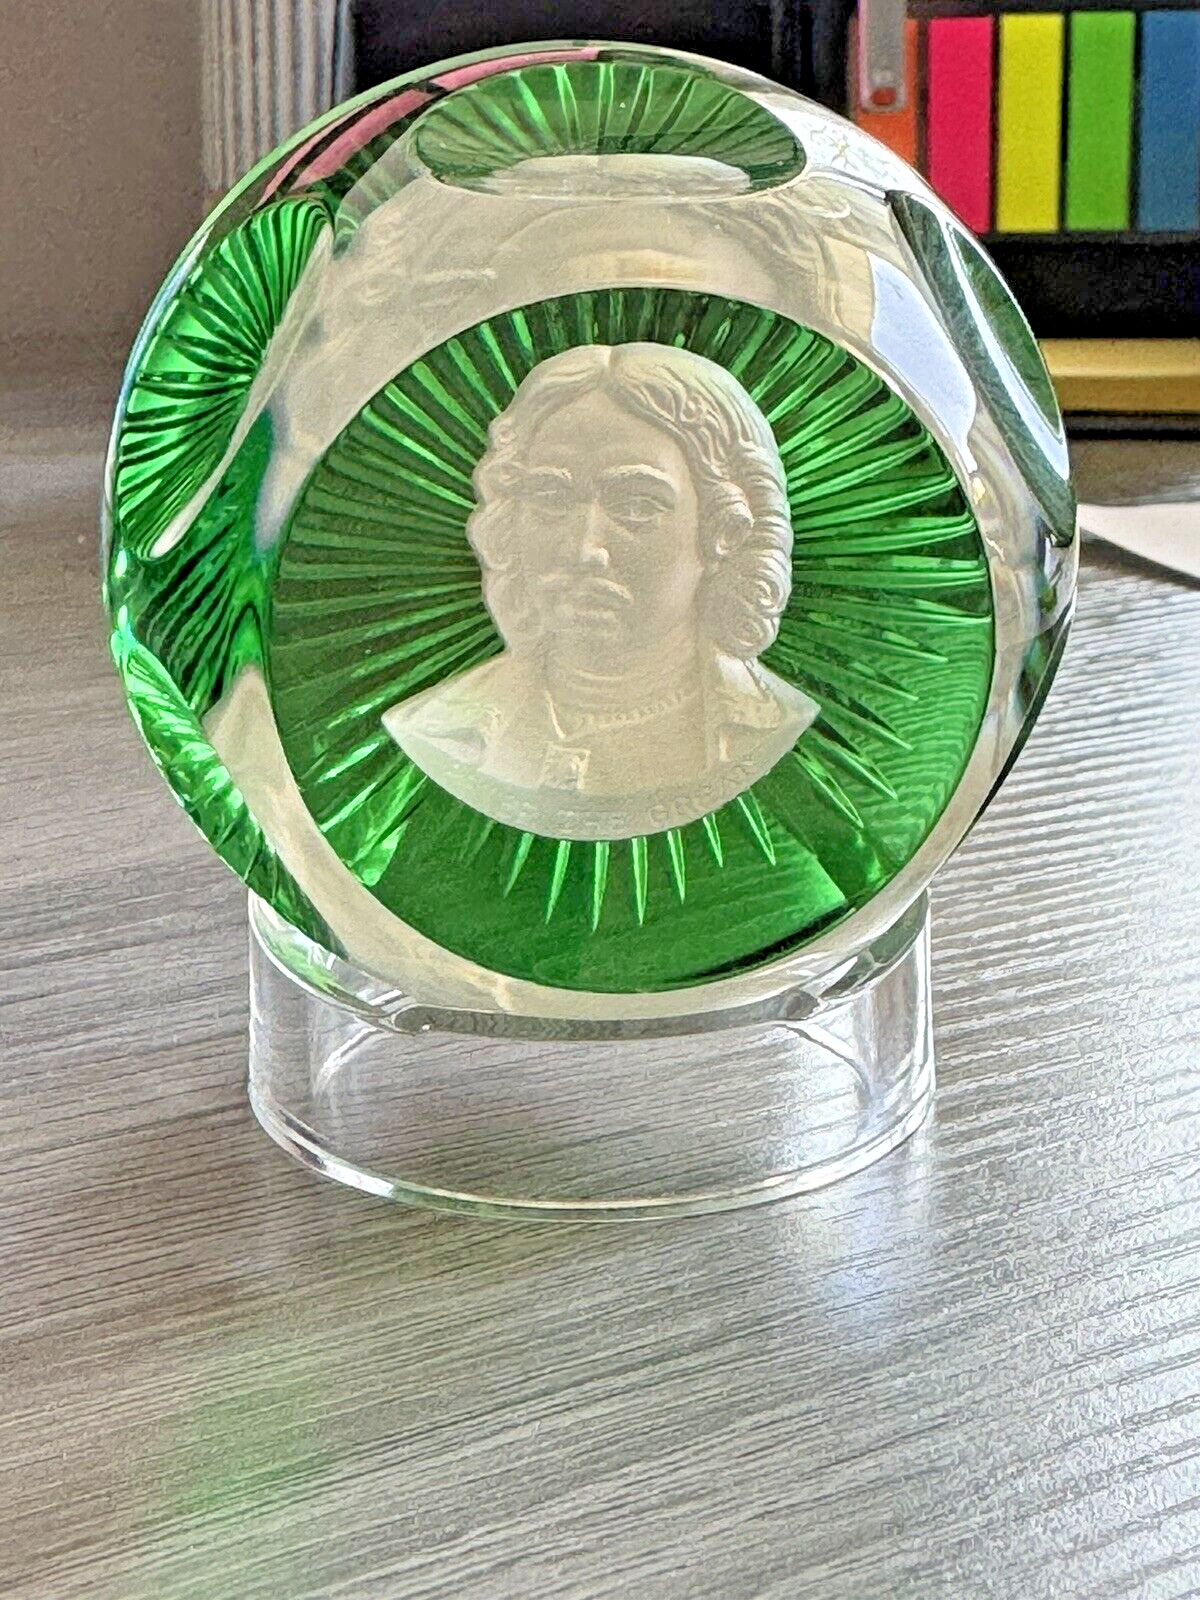 RARE Peter the Great 1977 Baccarat Franklin Mint Crystal Paper Weight